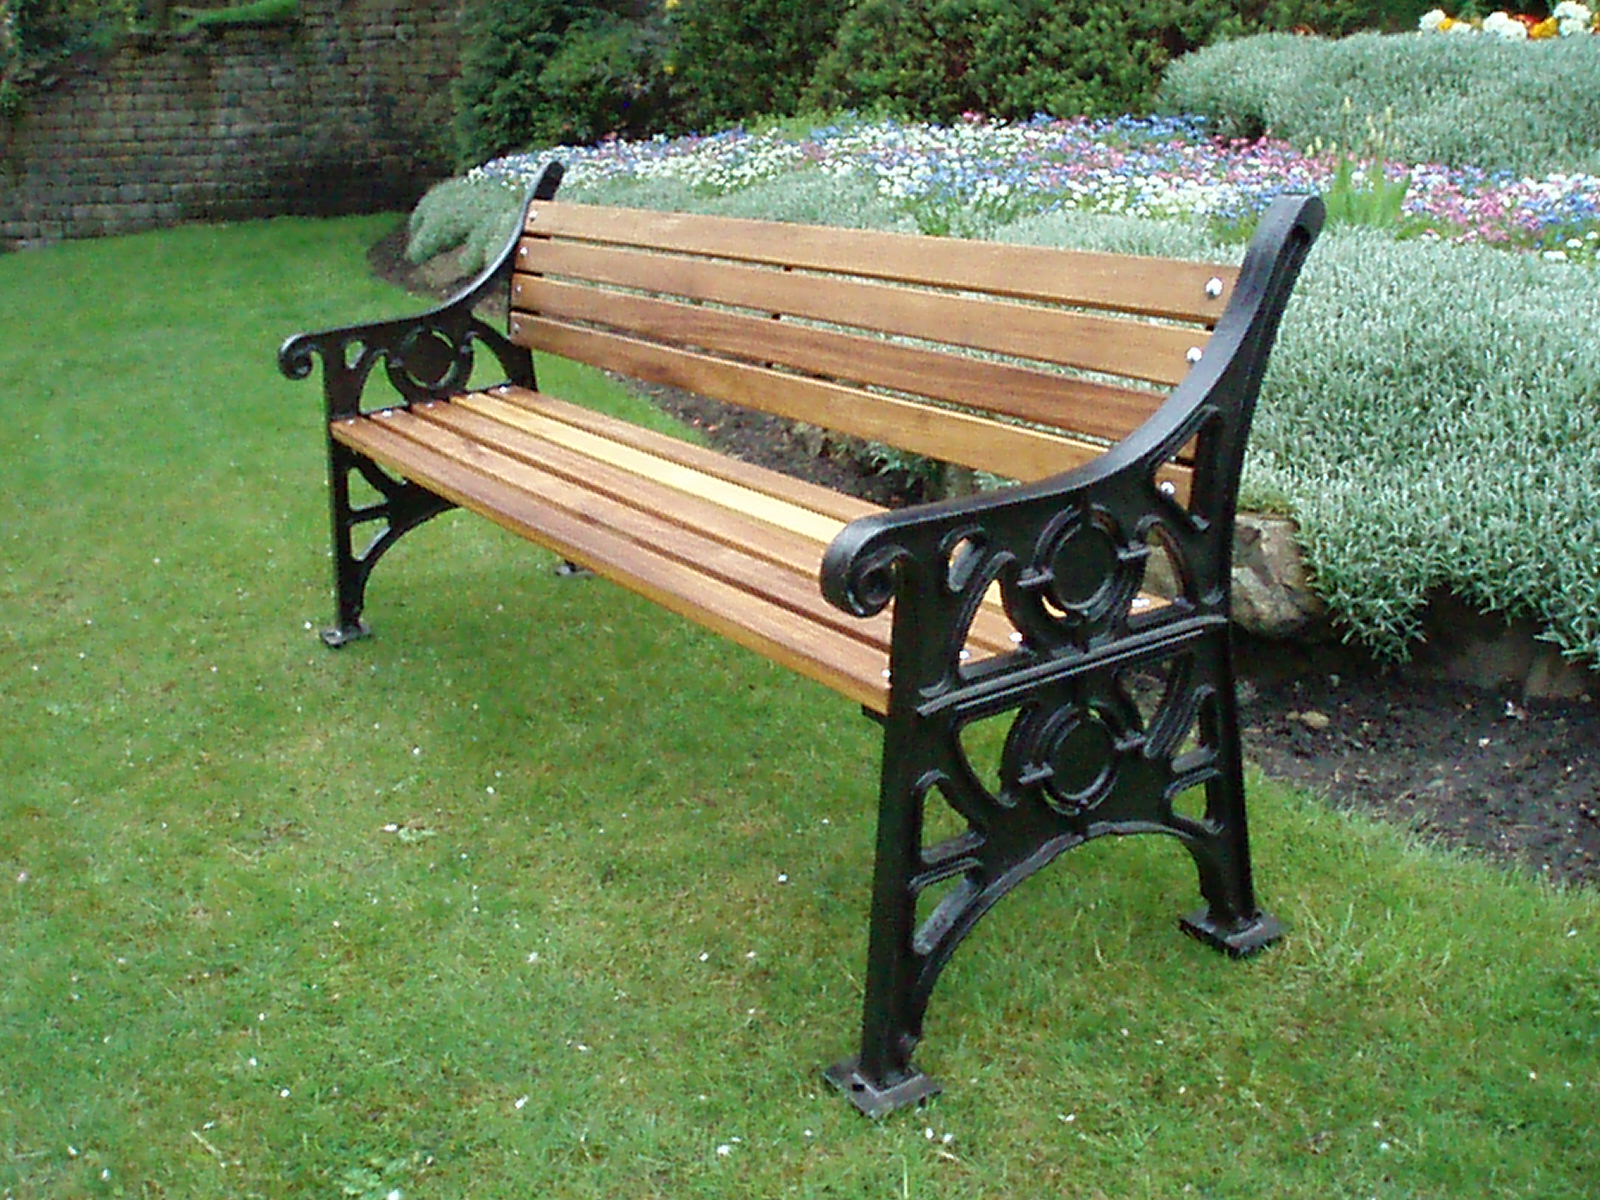 Cast Iron Bench Architectural Roofing, Cast Iron Garden Benches Australia